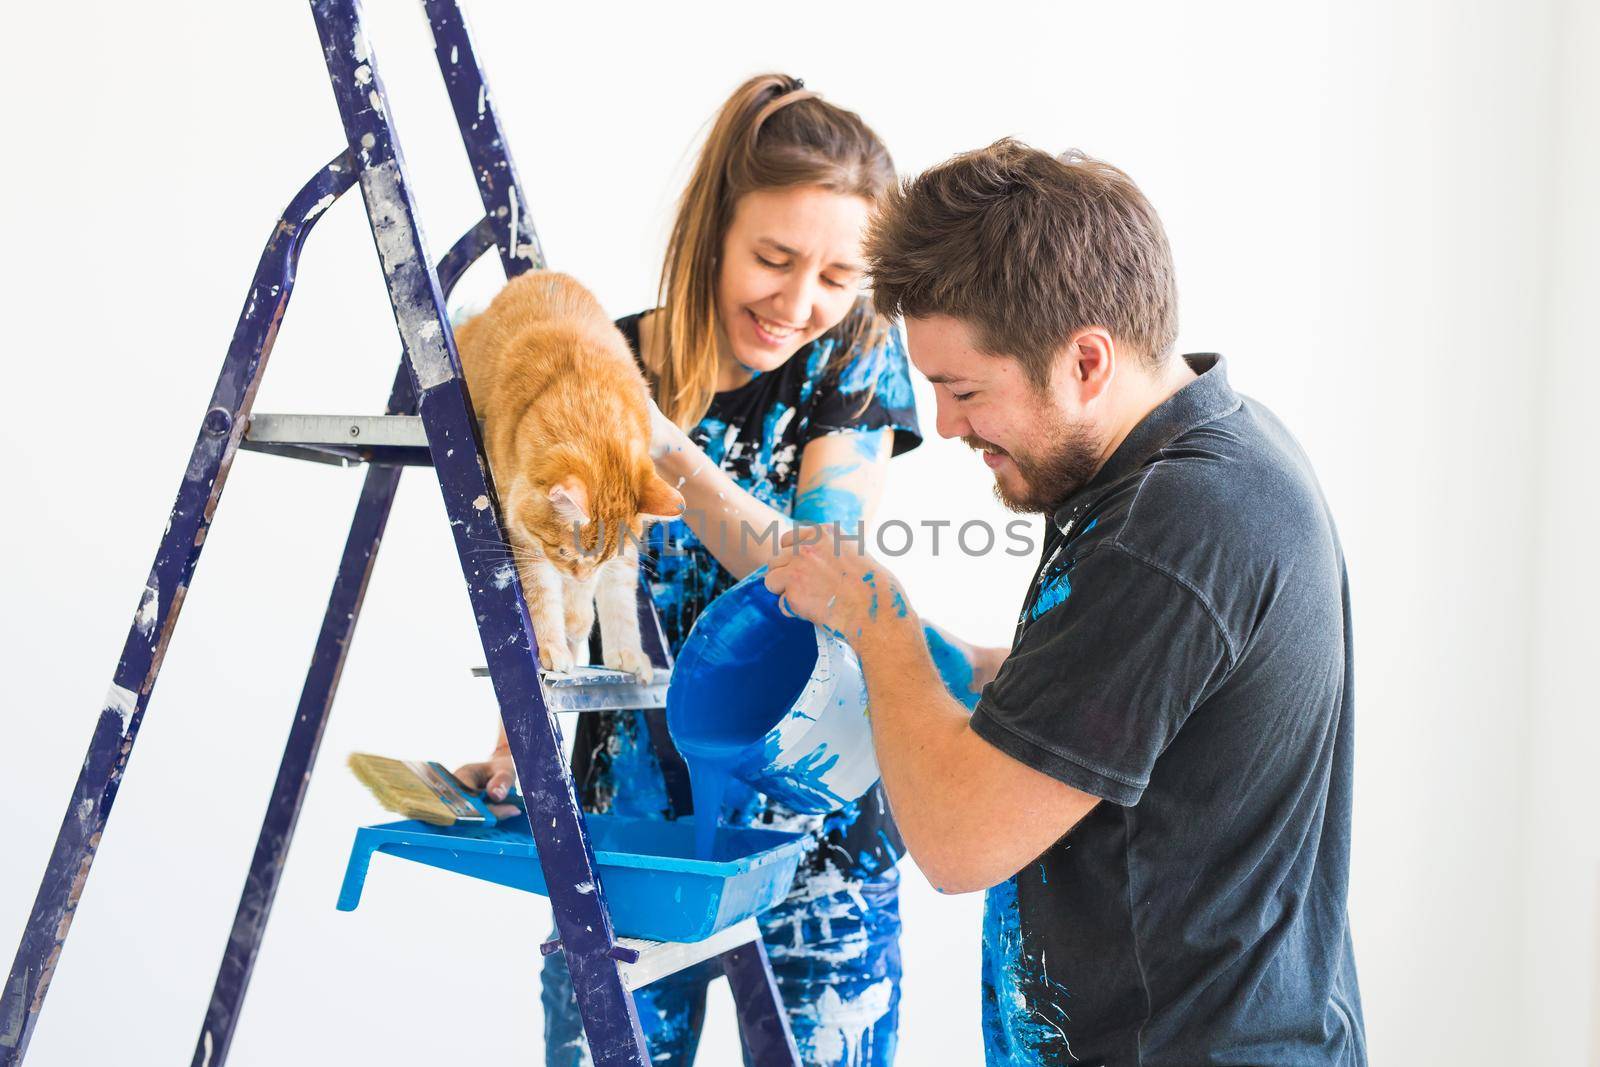 People, redecoration and renovation concept - portrait of couple with cat pour paint.